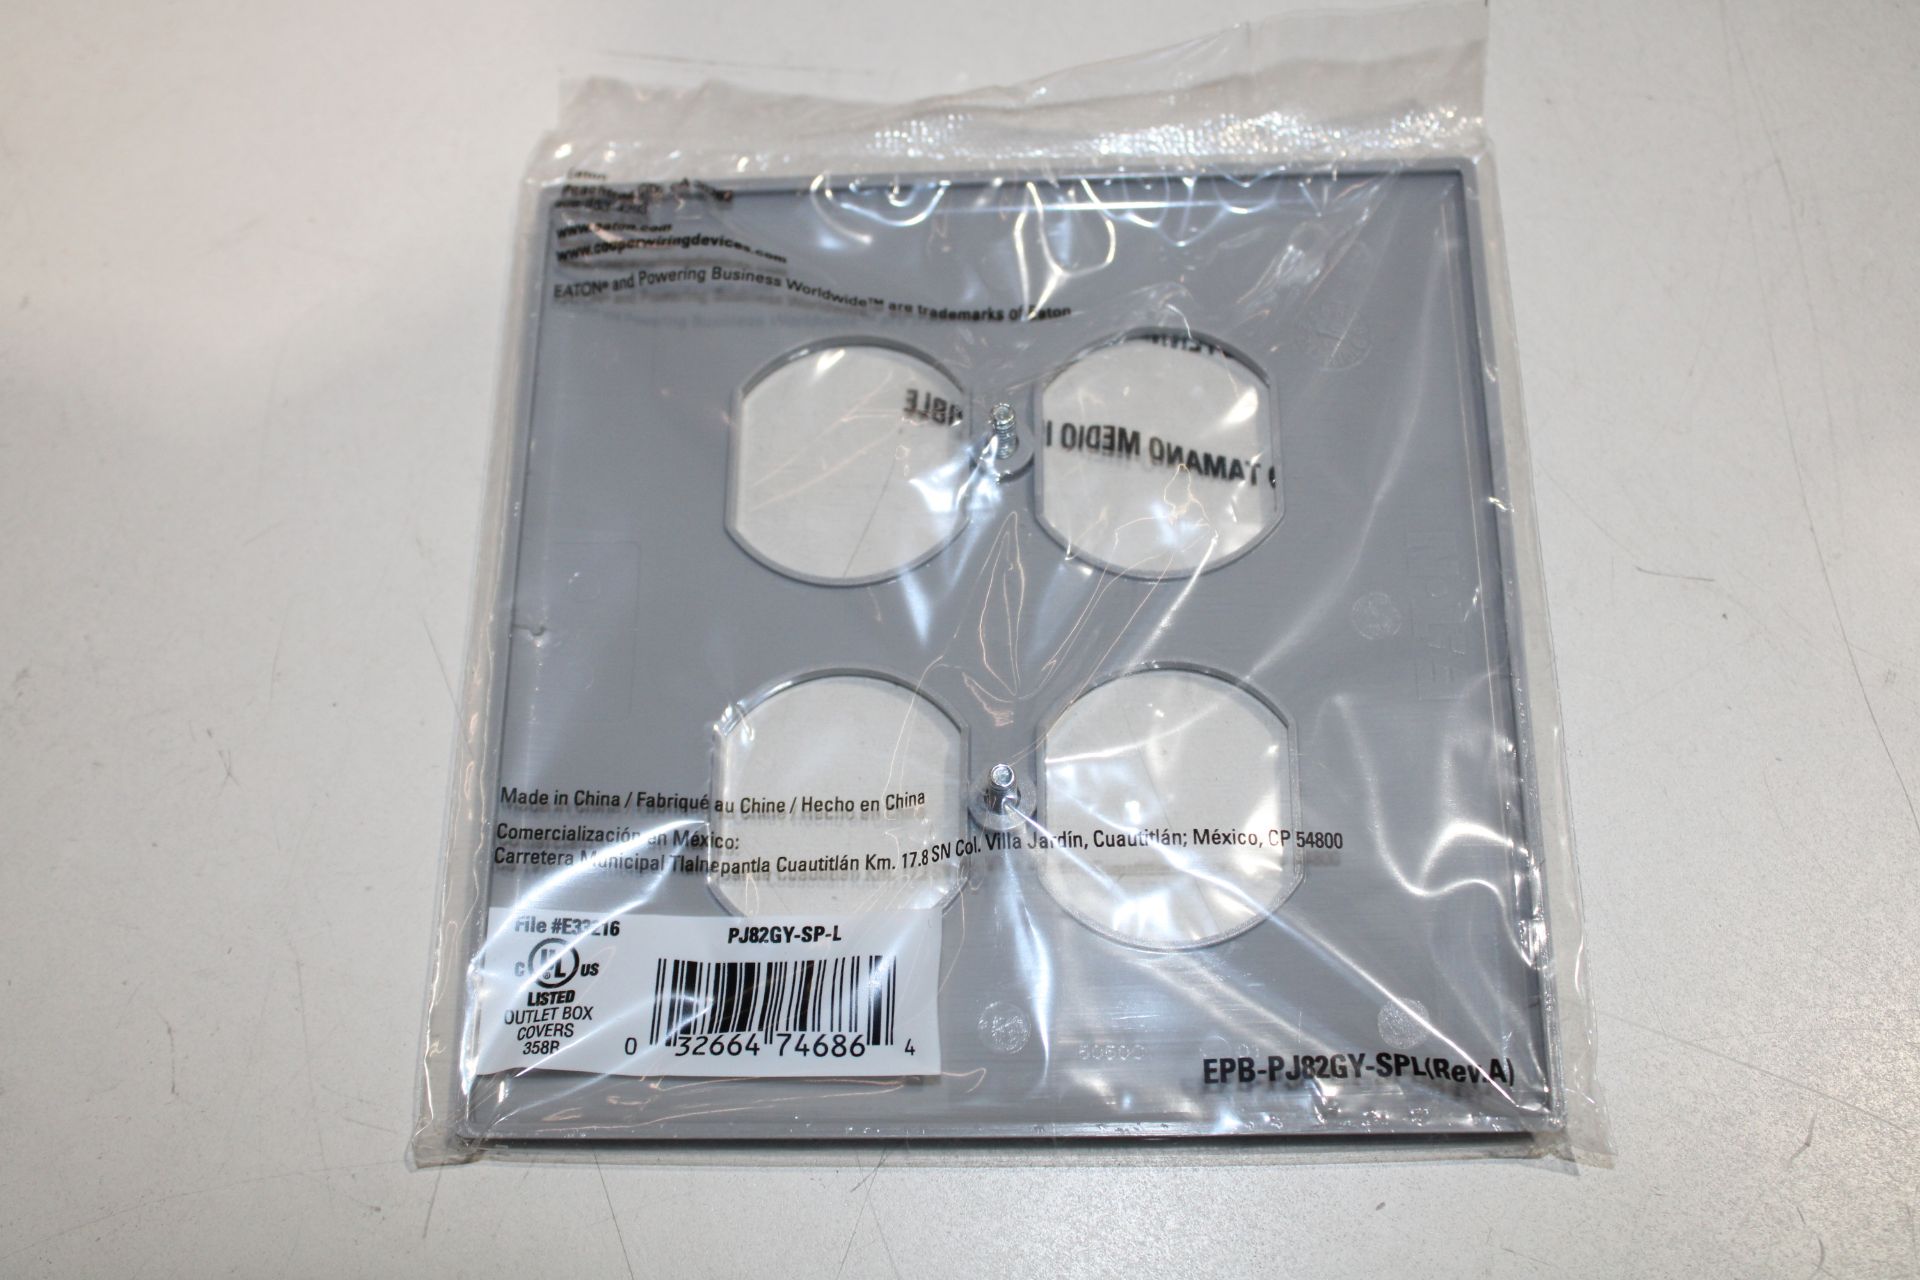 100x Eaton PJ82GY-SP-L Wallplates and Accessories EA